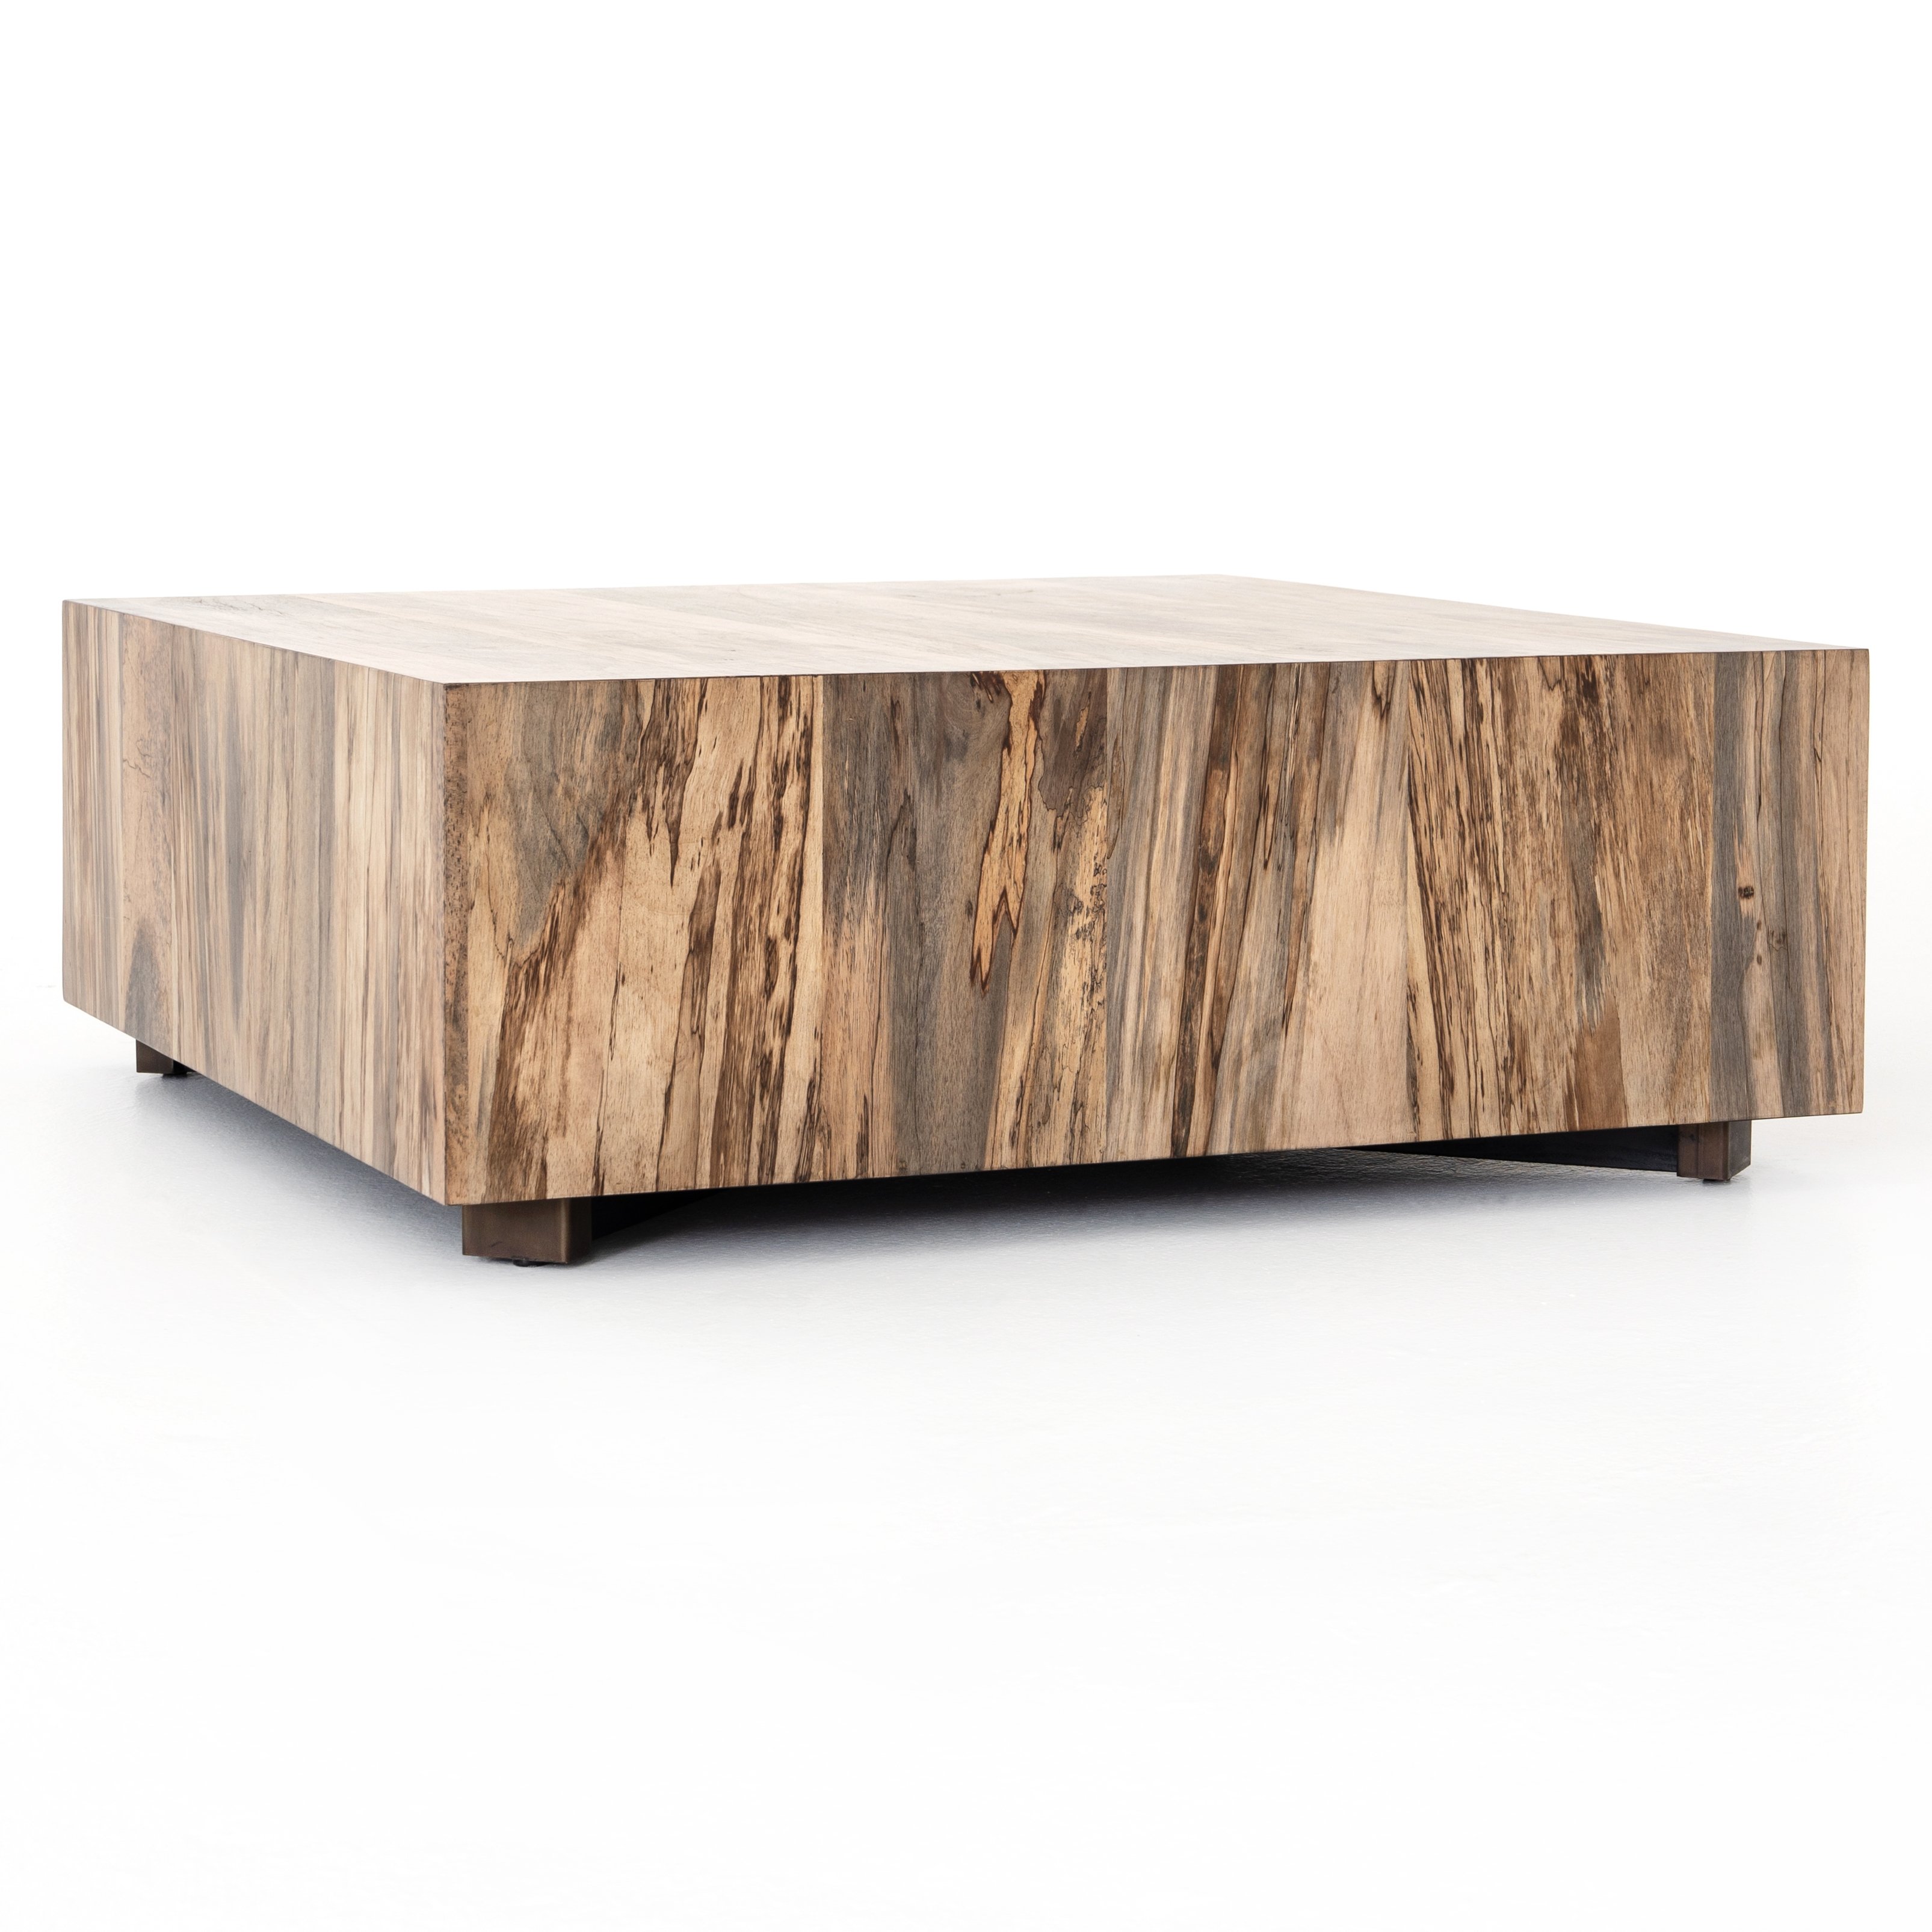 Hudson Square Coffee Table-Spalted Prmvr - Image 2